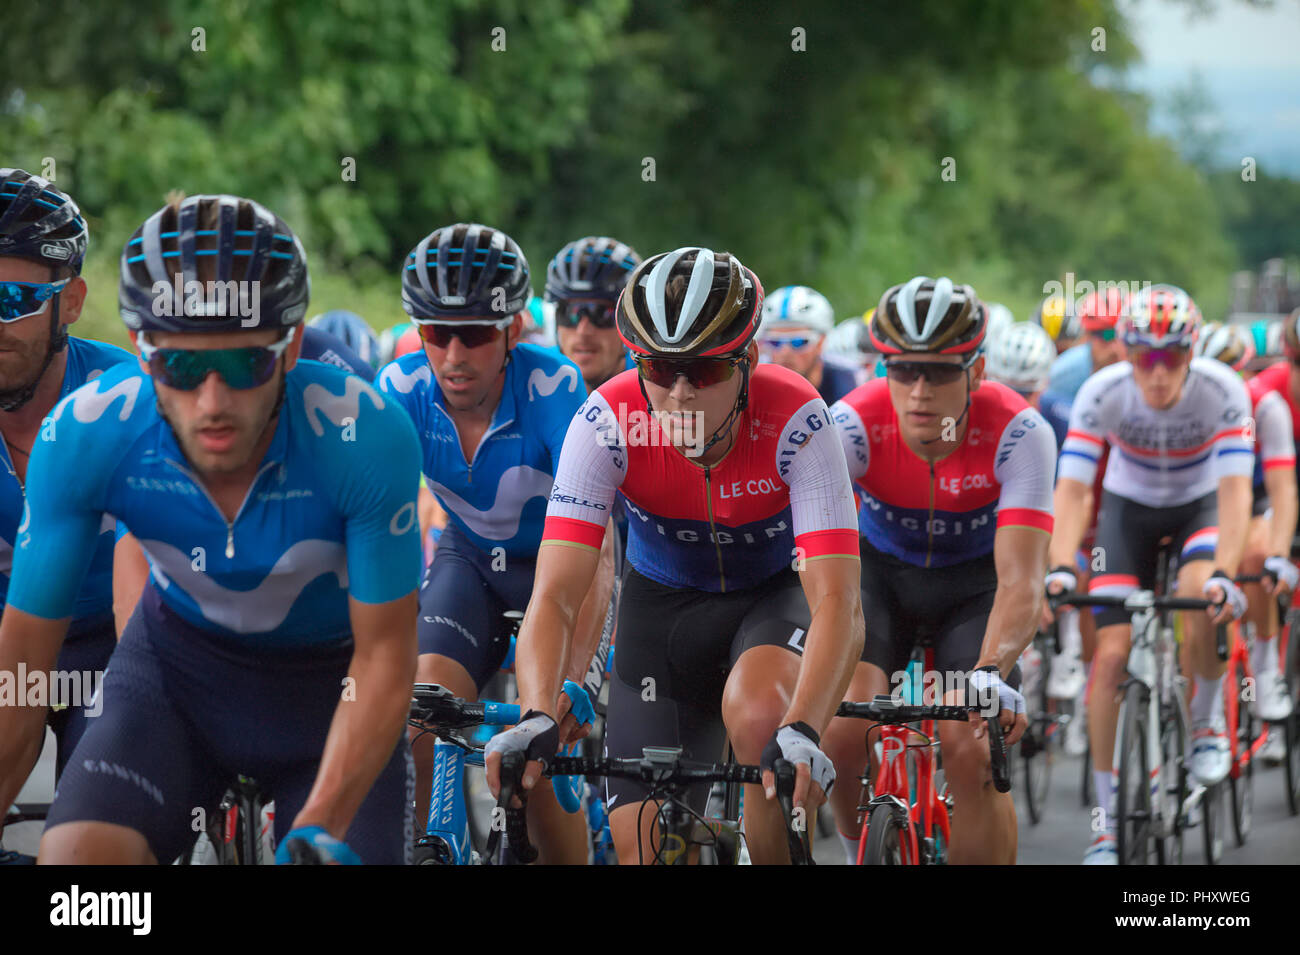 Tiverton, UK. 3rd September 2018. Joey Walker - Team Wiggins - in the peloton at the top of Long Drag Hill Tiverton, 2018 Tour of Britain Devon Stage Credit: Martin Hughes-Jones/Alamy Live News Stock Photo